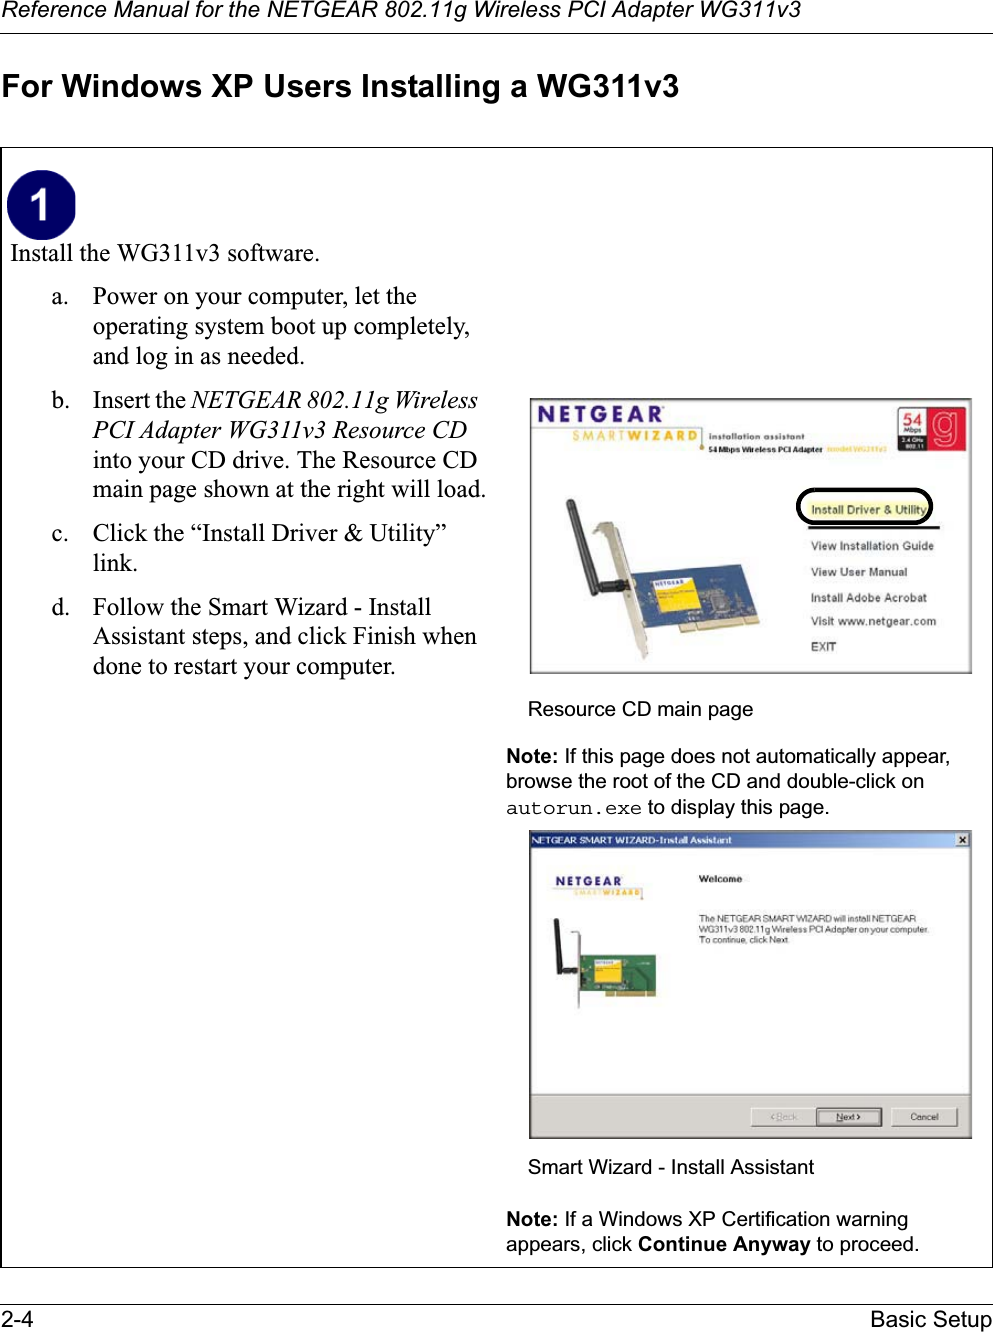 Reference Manual for the NETGEAR 802.11g Wireless PCI Adapter WG311v32-4 Basic SetupFor Windows XP Users Installing a WG311v3Install the WG311v3 software. a. Power on your computer, let the operating system boot up completely, and log in as needed.b. Insert the NETGEAR 802.11g WirelessPCI Adapter WG311v3 Resource CDinto your CD drive. The Resource CD main page shown at the right will load.c. Click the “Install Driver &amp; Utility” link.d. Follow the Smart Wizard - Install Assistant steps, and click Finish when done to restart your computer.Note: If this page does not automatically appear, browse the root of the CD and double-click on autorun.exe to display this page.Note: If a Windows XP Certification warning appears, click Continue Anyway to proceed.Resource CD main pageSmart Wizard - Install Assistant